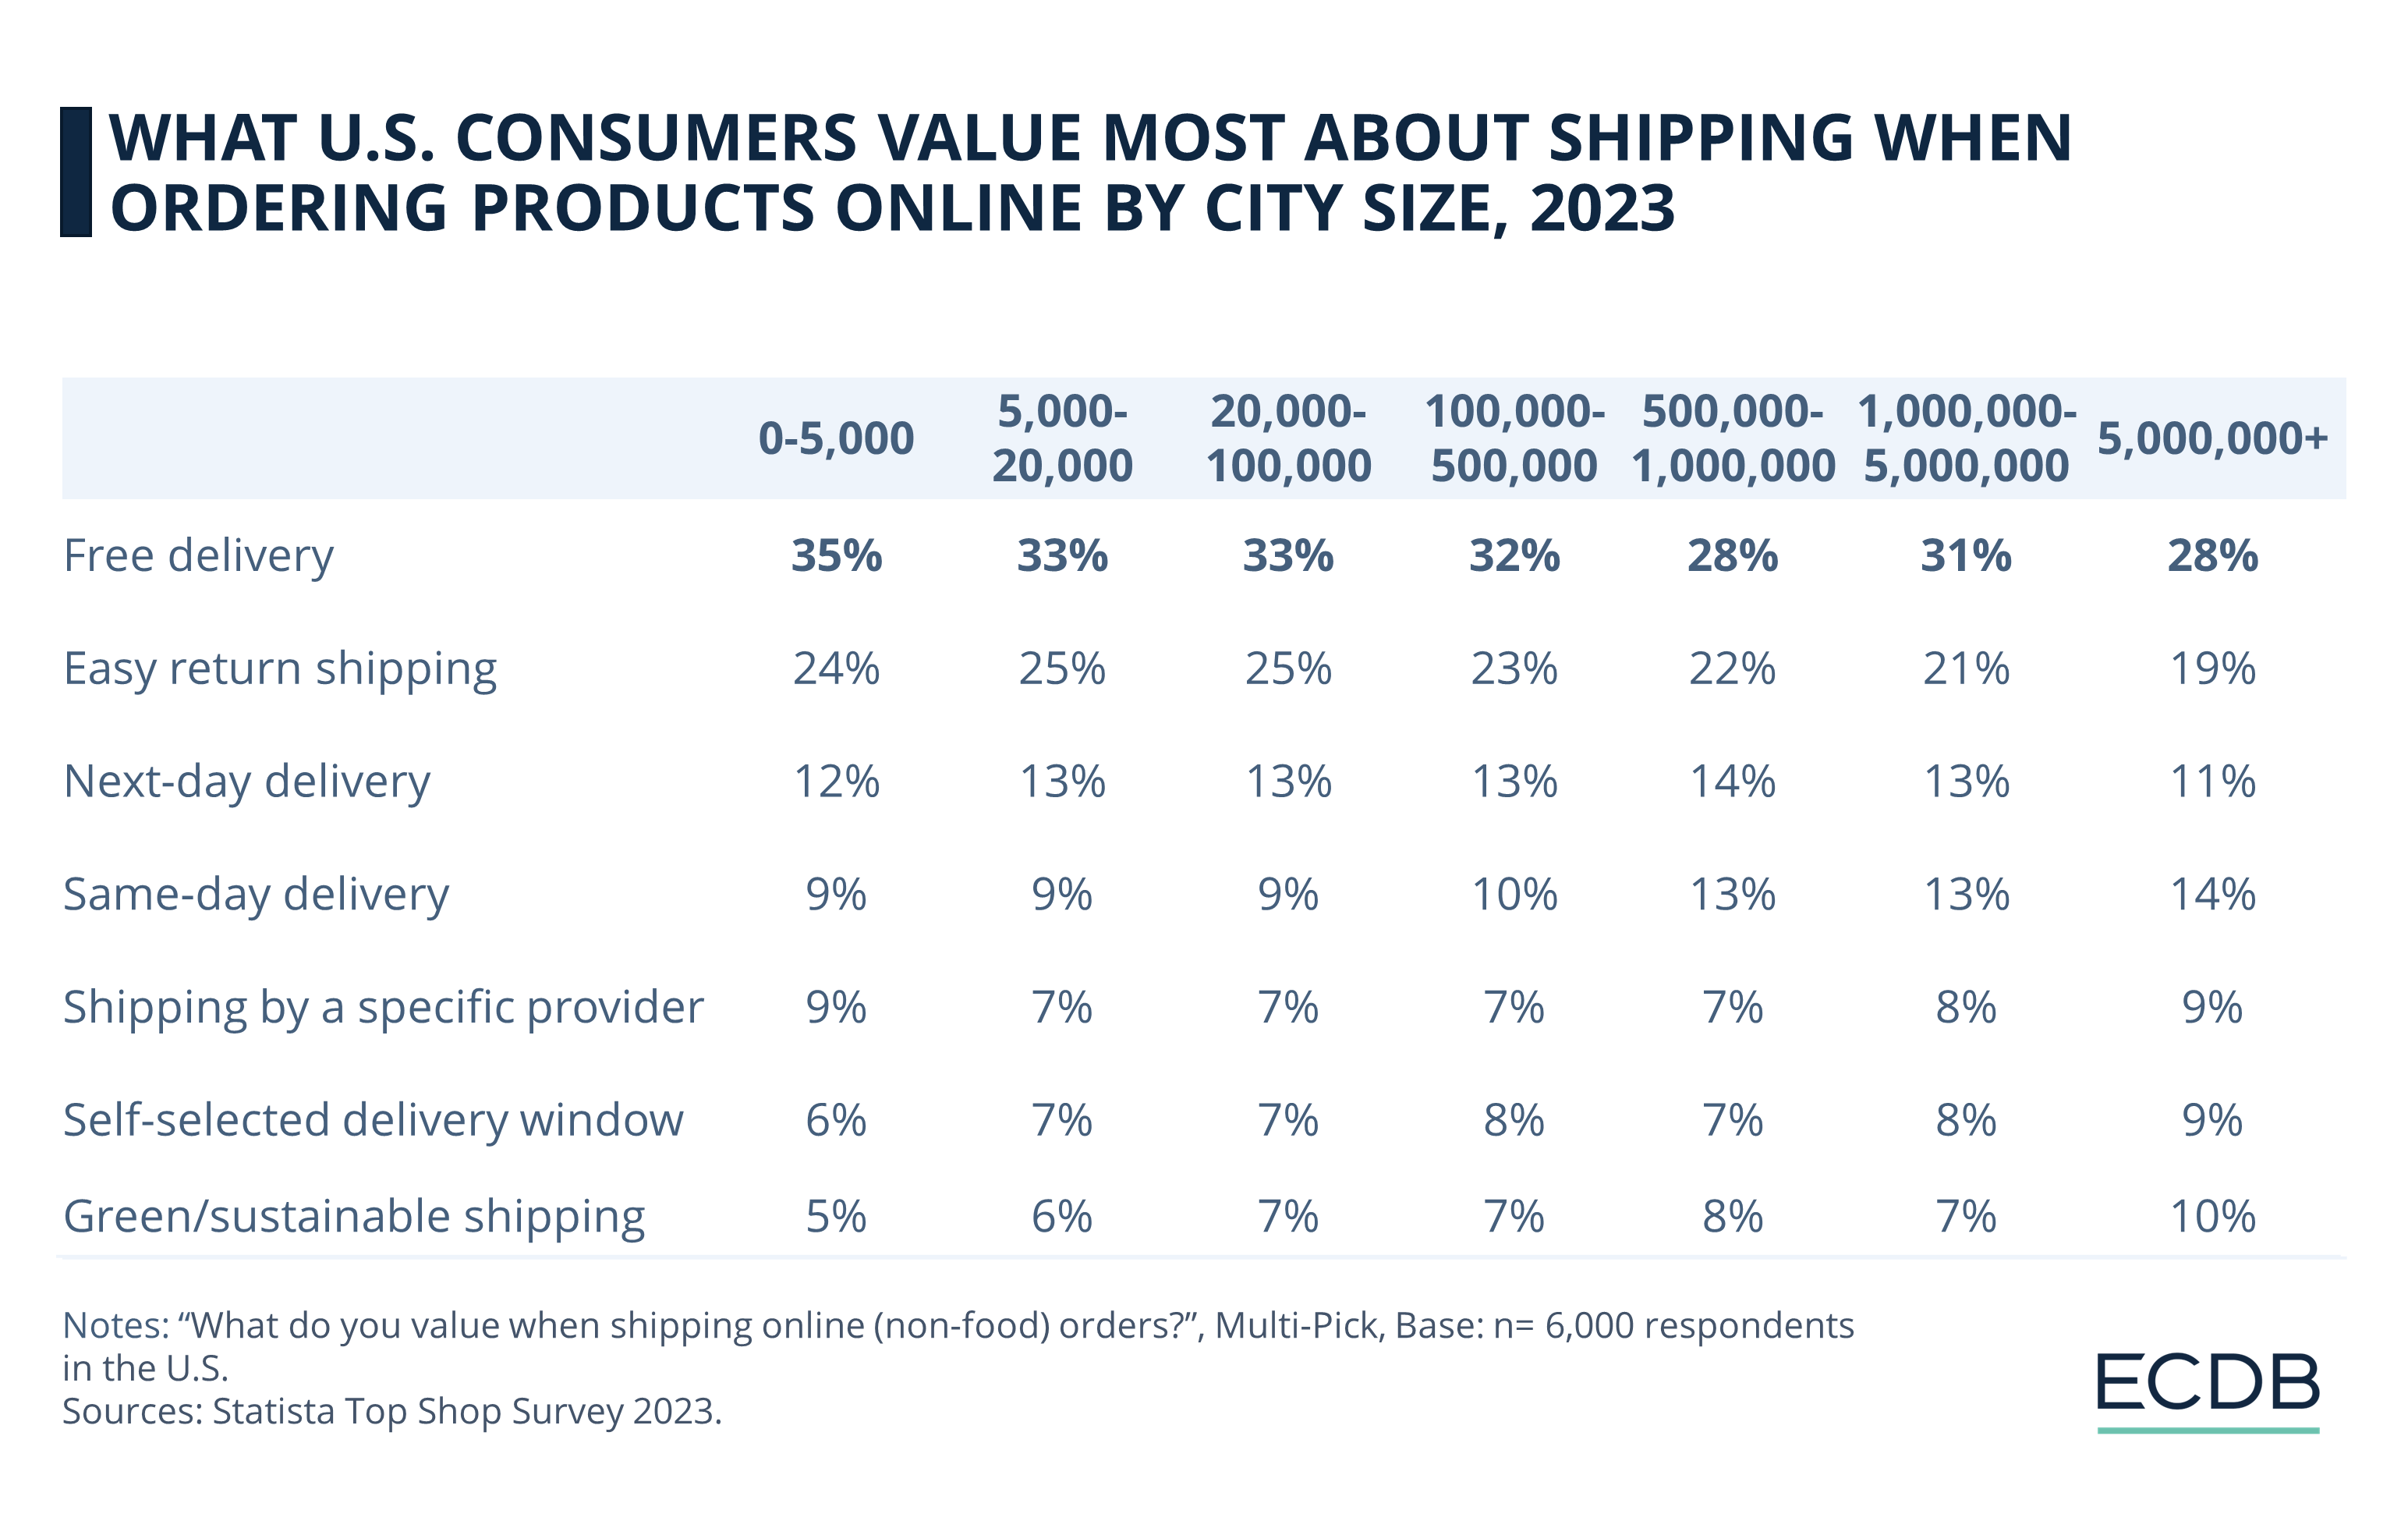 What U.S. Consumers Value About Shipping When Ordering Products Online by City Size, 2023